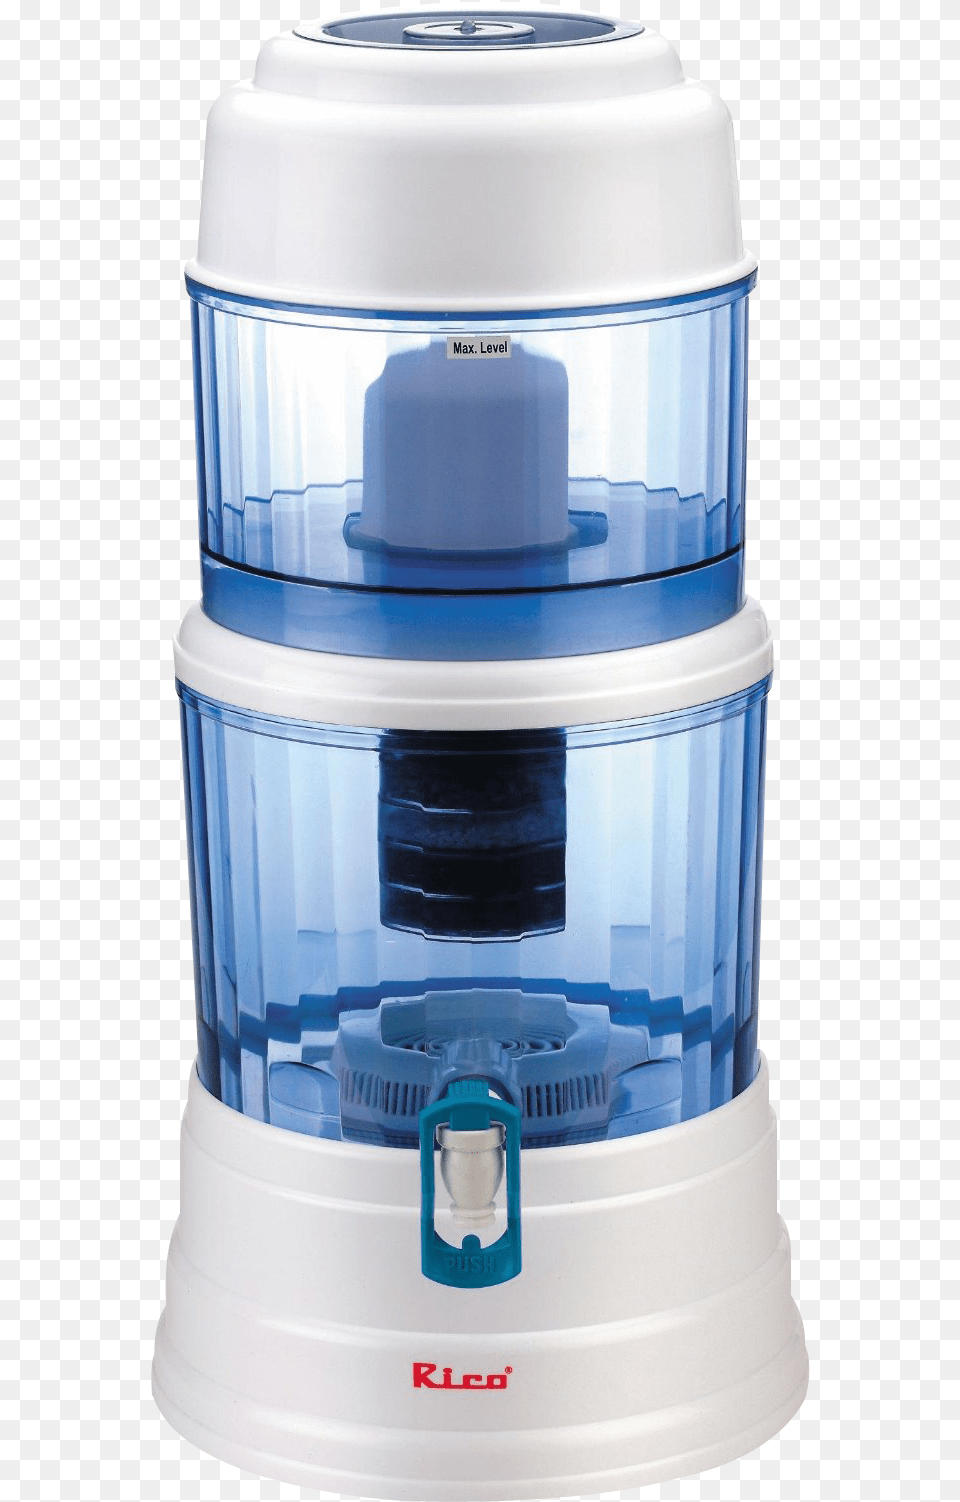 White Image Purepng Water Filter, Appliance, Cooler, Device, Electrical Device Free Transparent Png